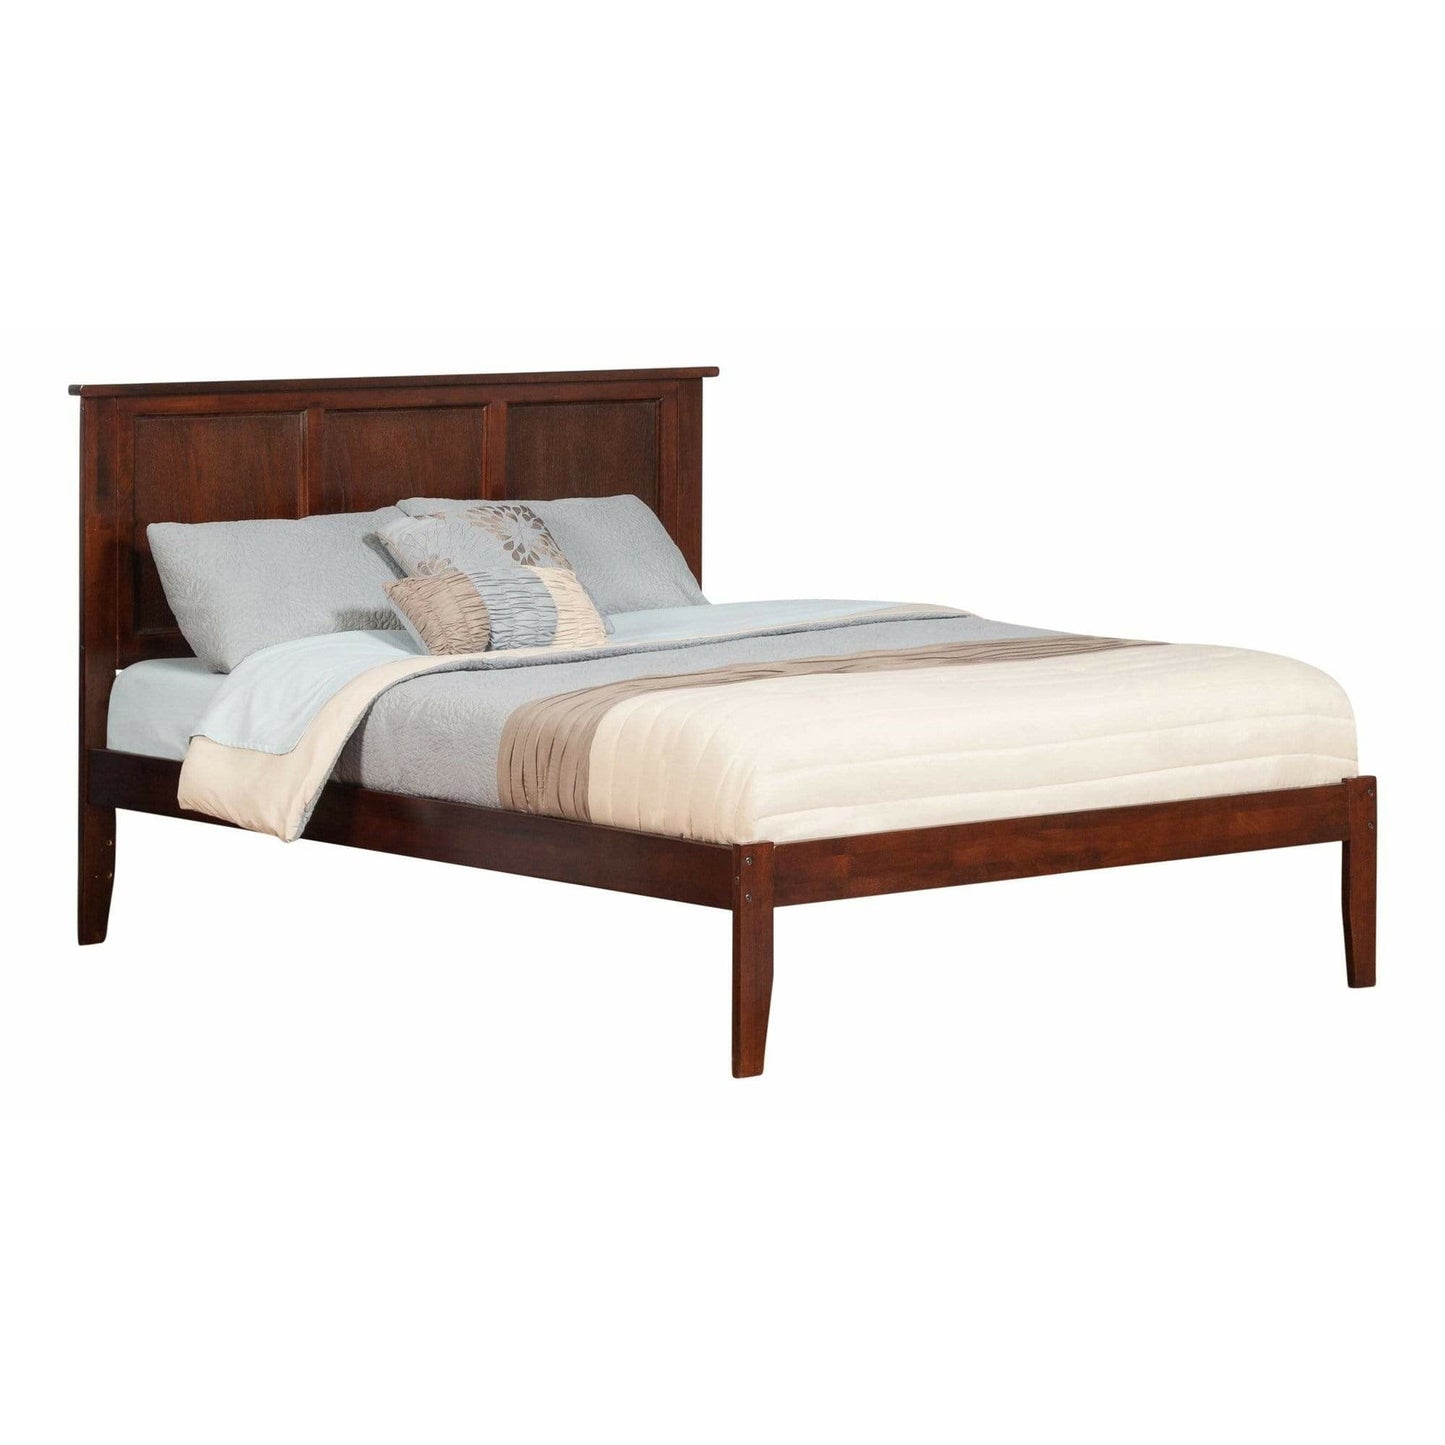 Atlantic Furniture Bed Walnut Madison King Platform Bed with Open Foot Board in Espresso